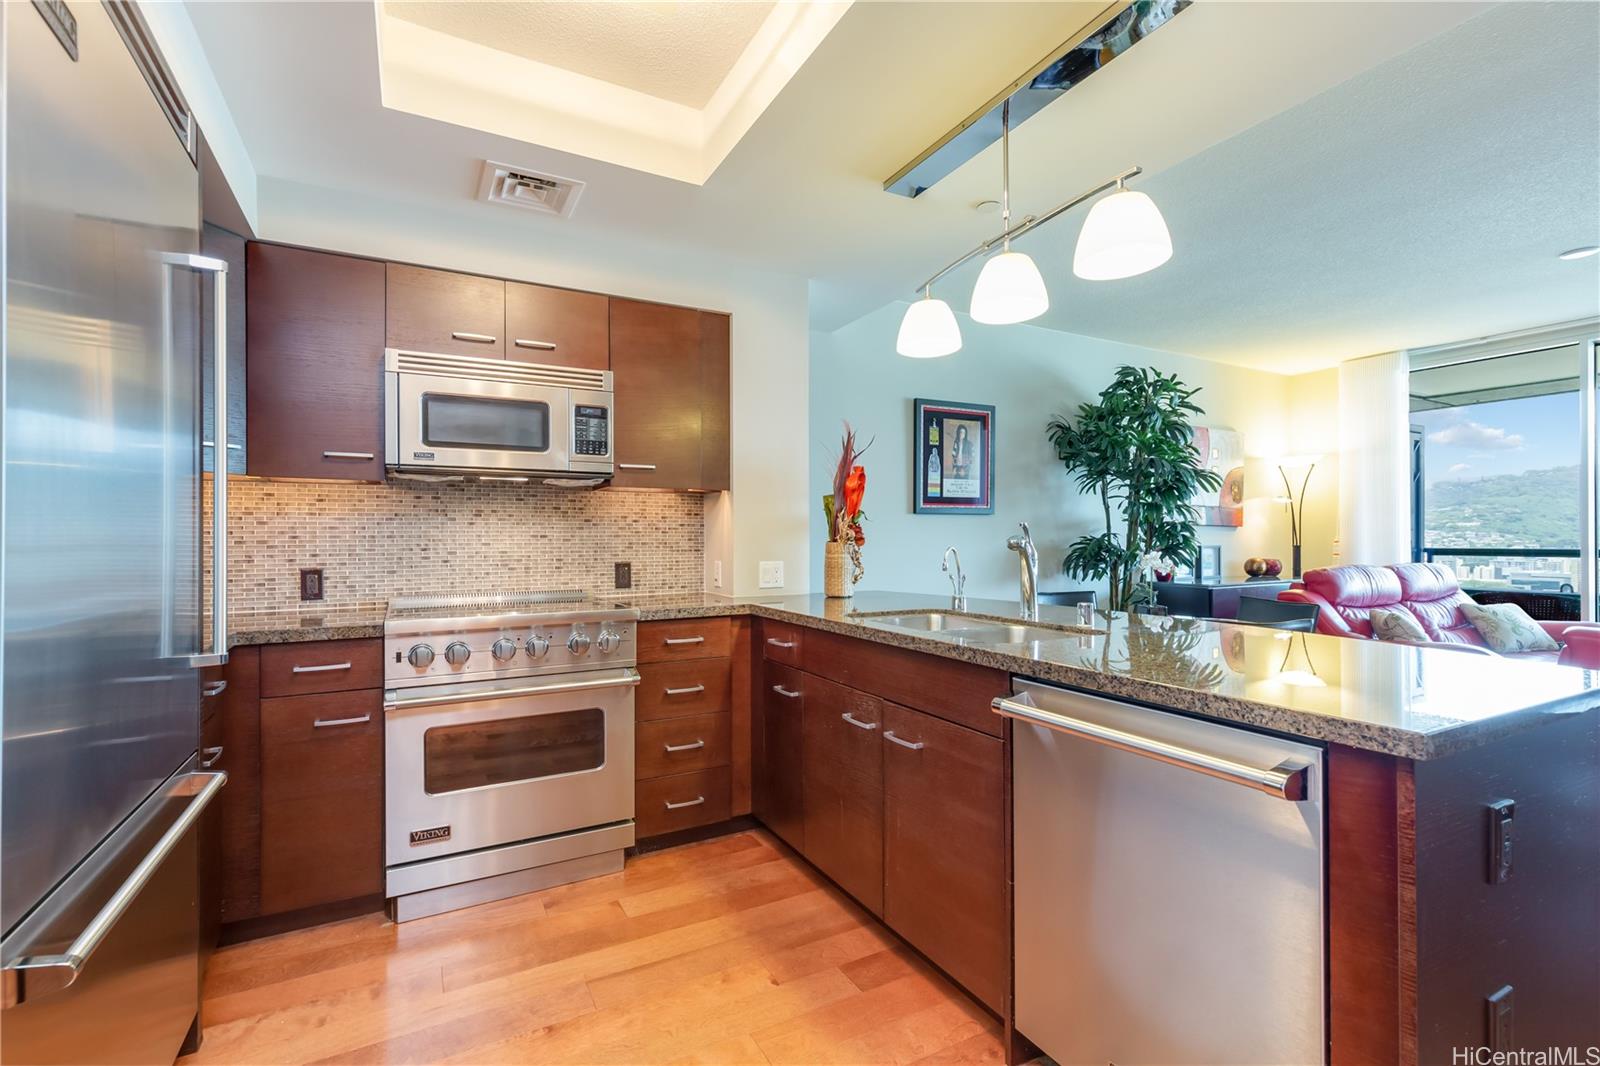 a kitchen with stainless steel appliances a sink stove and refrigerator